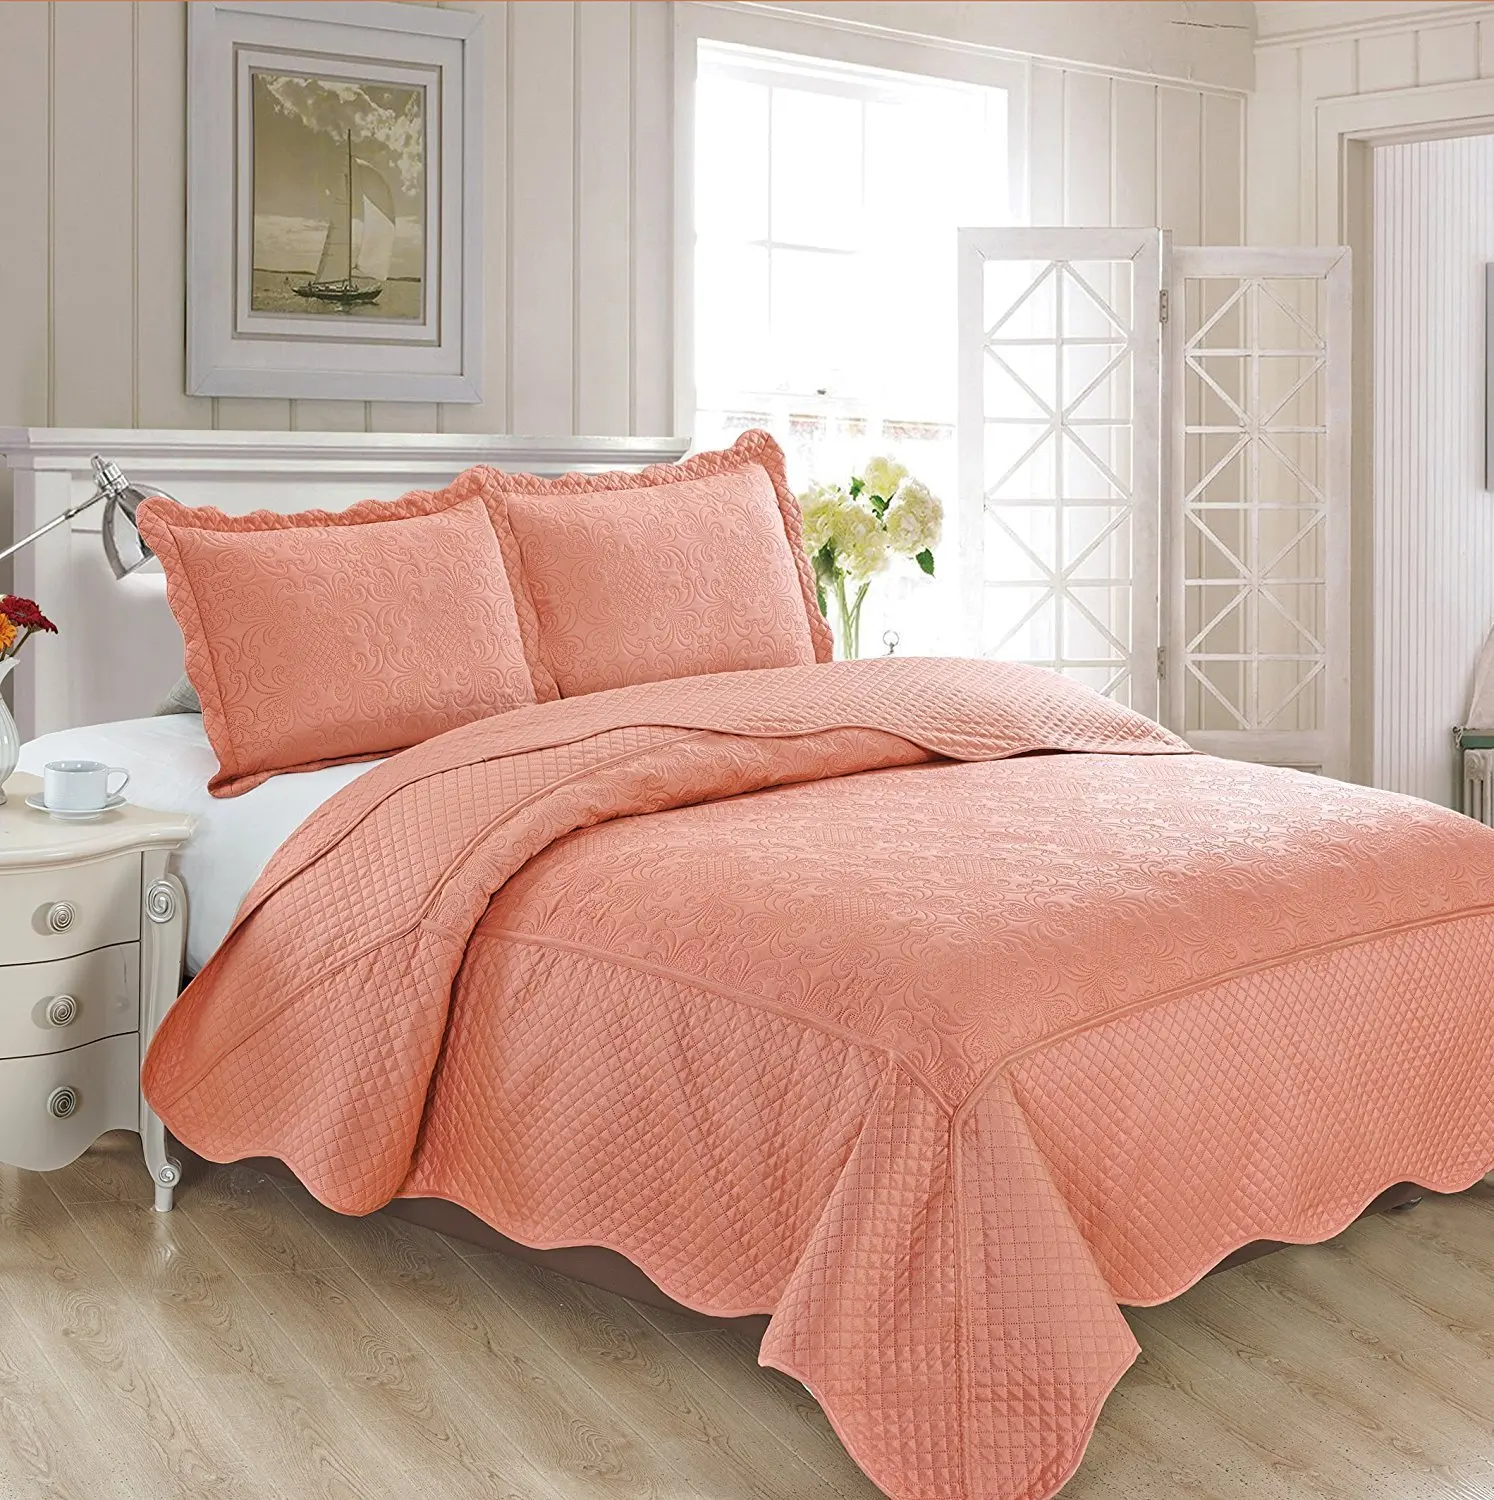 Cheap Coral Colored Bedspread Find Coral Colored Bedspread Deals On Line At Alibaba Com